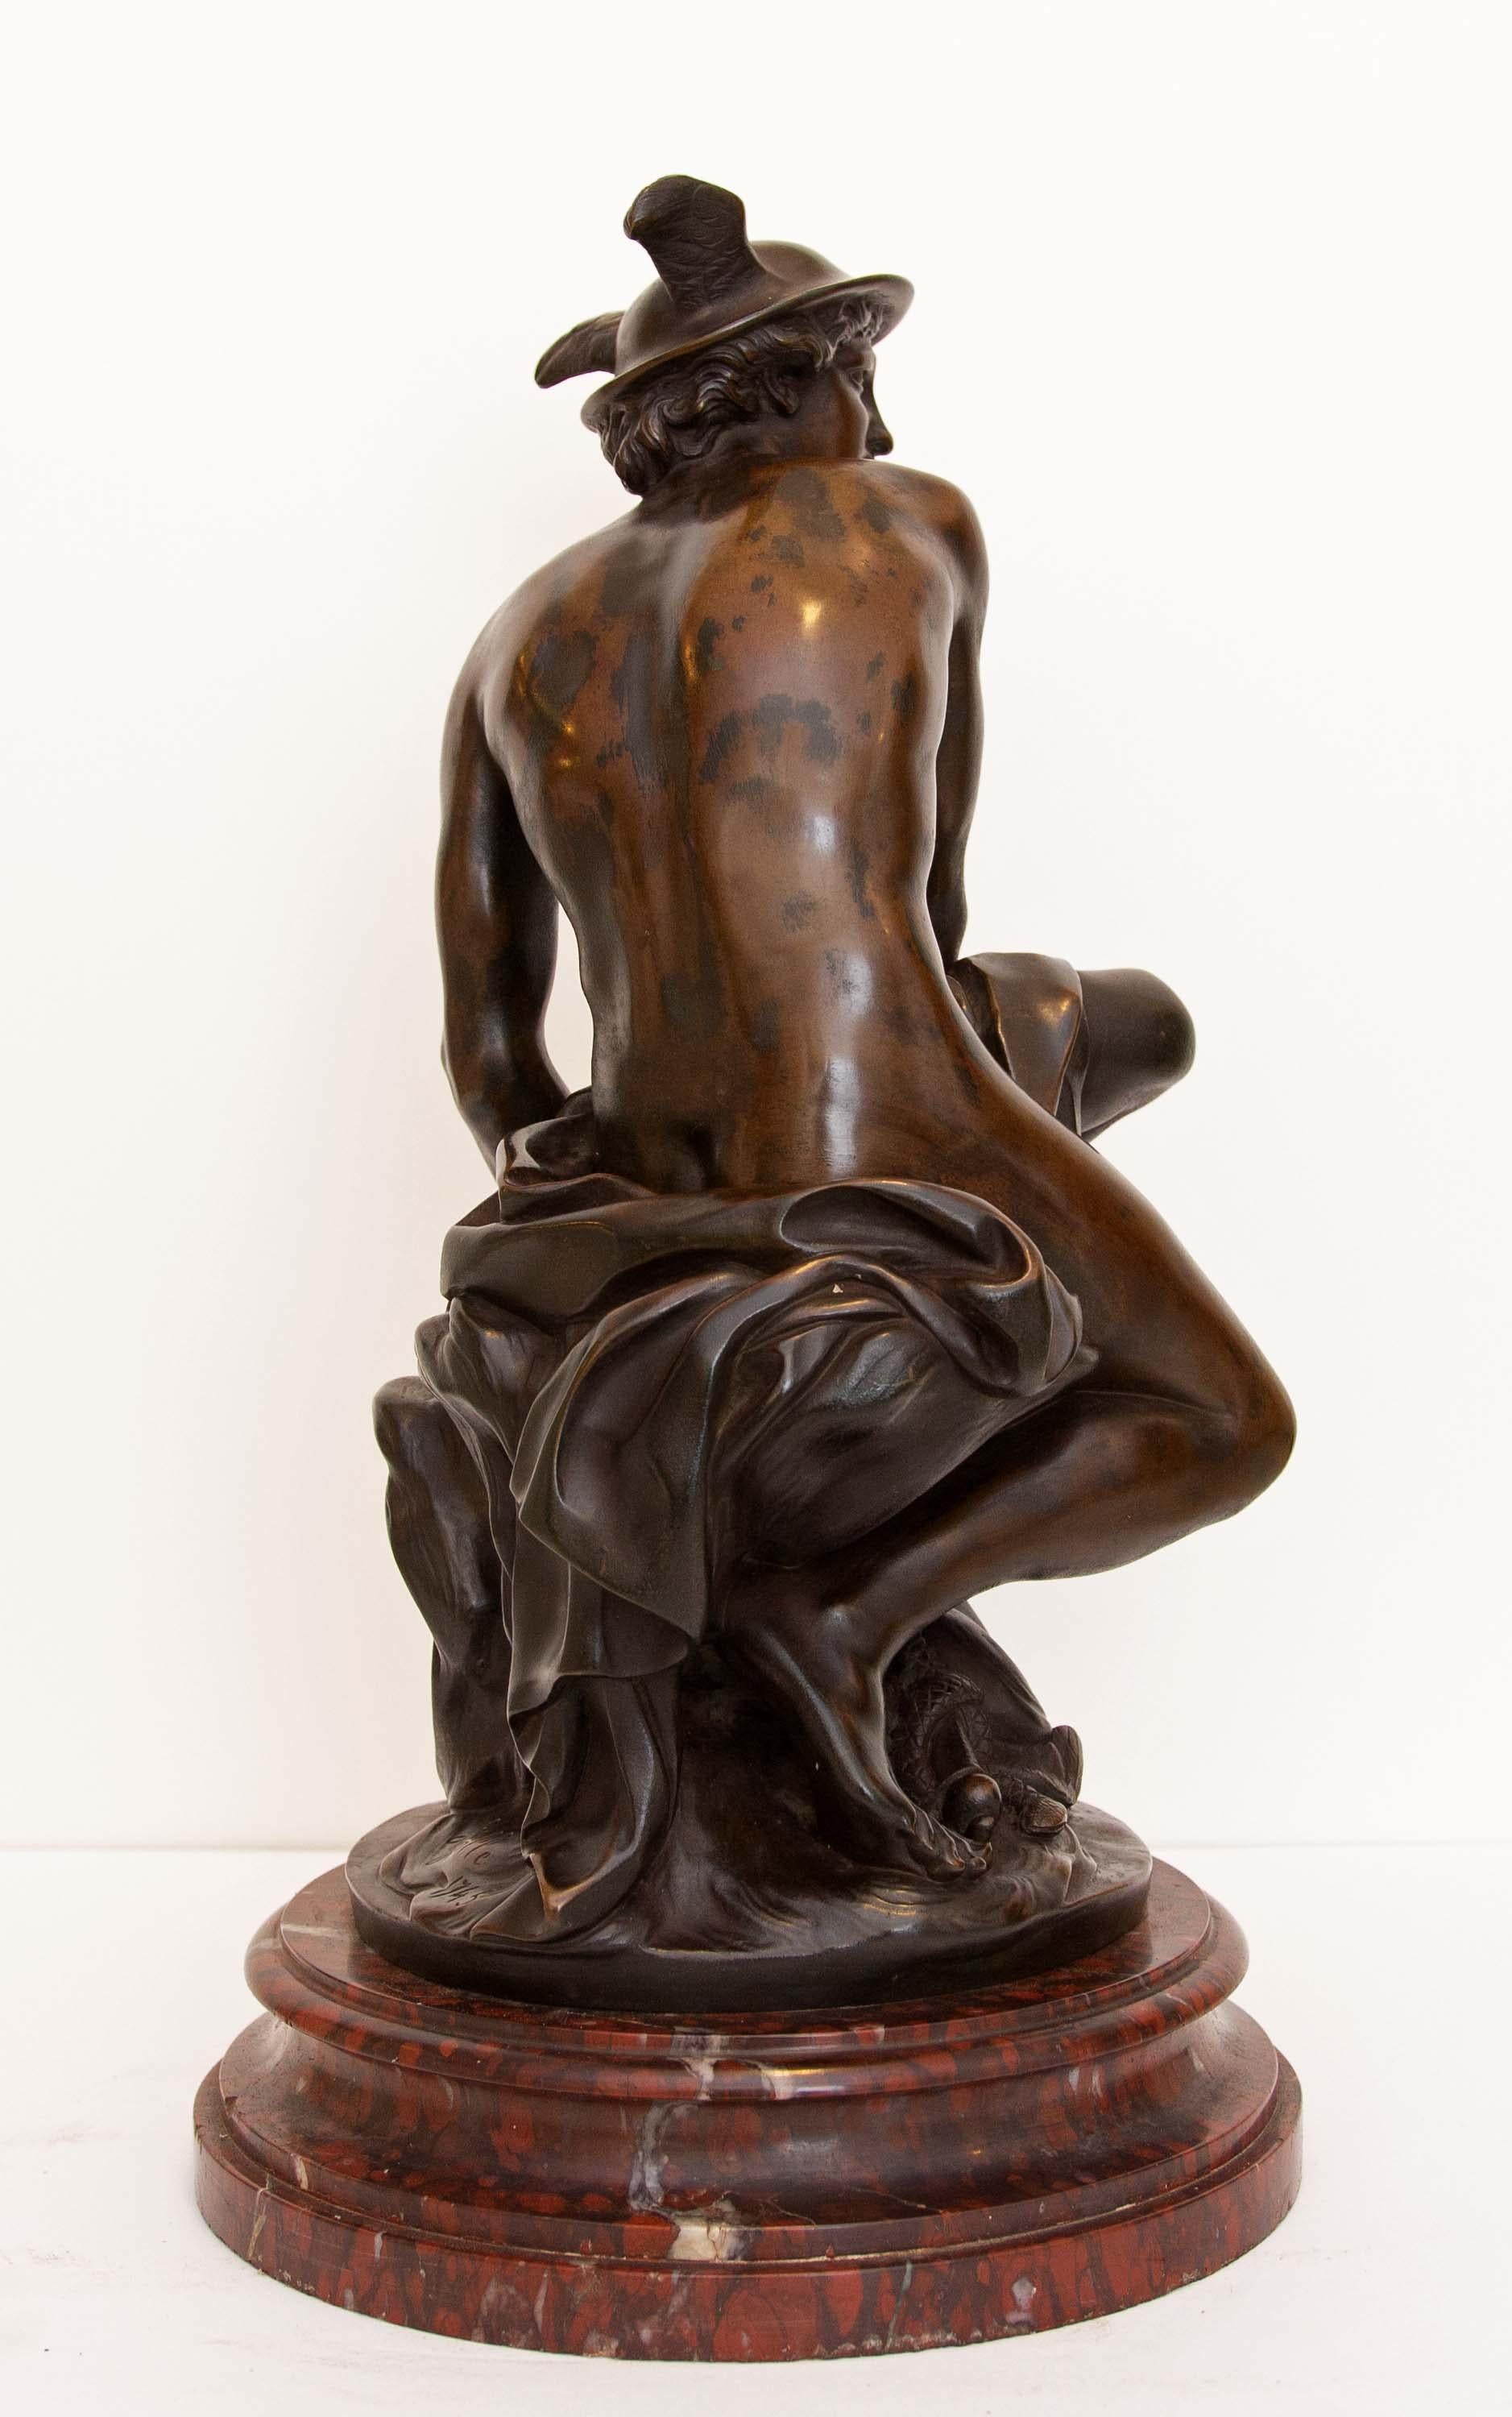 Seated Hermes Bronze Sculpture after Jean Pigalle 19th Century Mercury - Gold Figurative Sculpture by Jean-Baptiste Pigalle